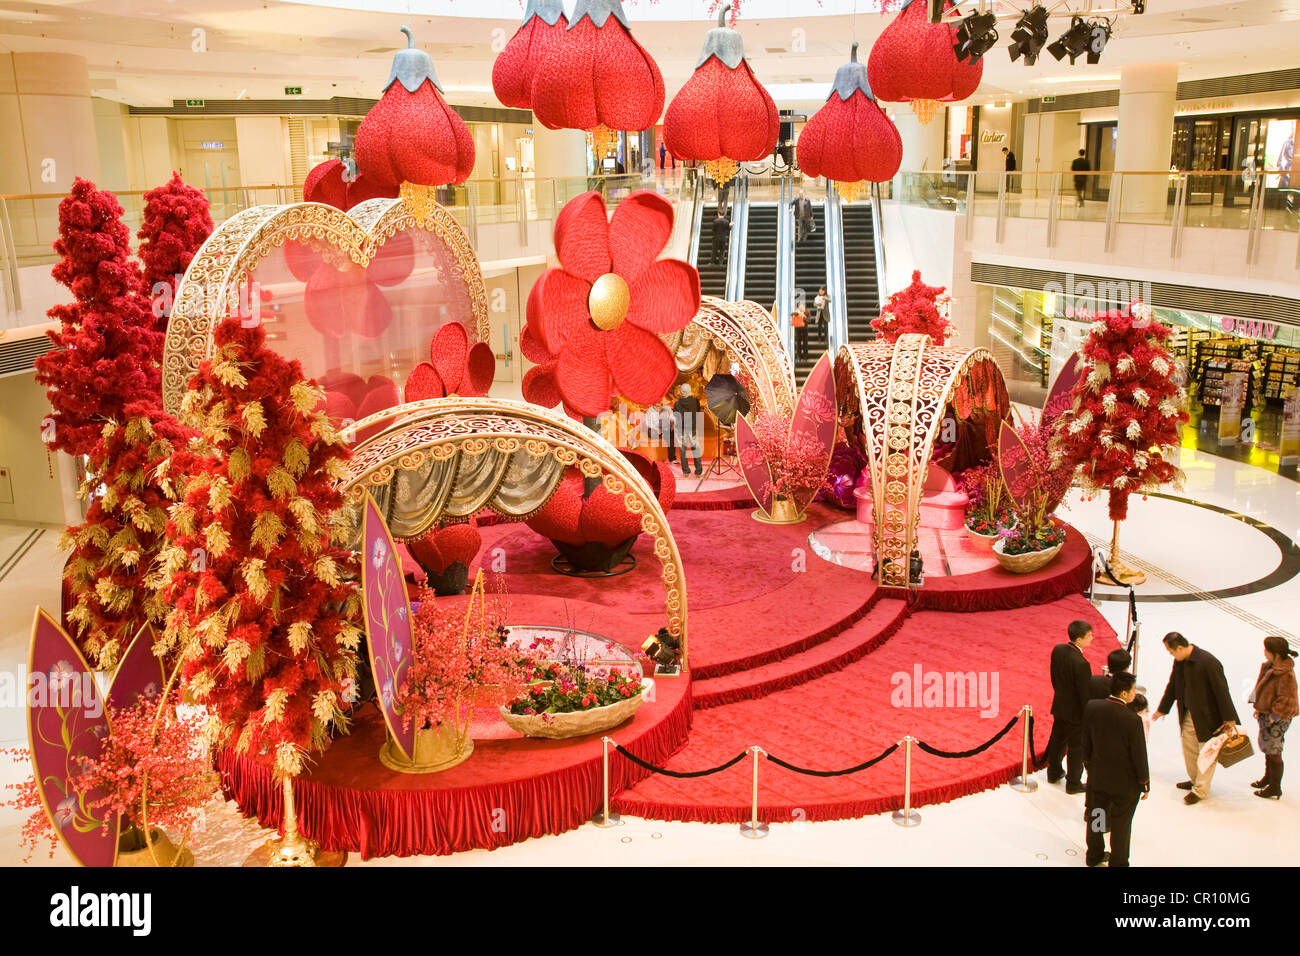 China, Hong Kong, Kowloon, Elements Commercial center, decoration for Chinese new year Stock Photo